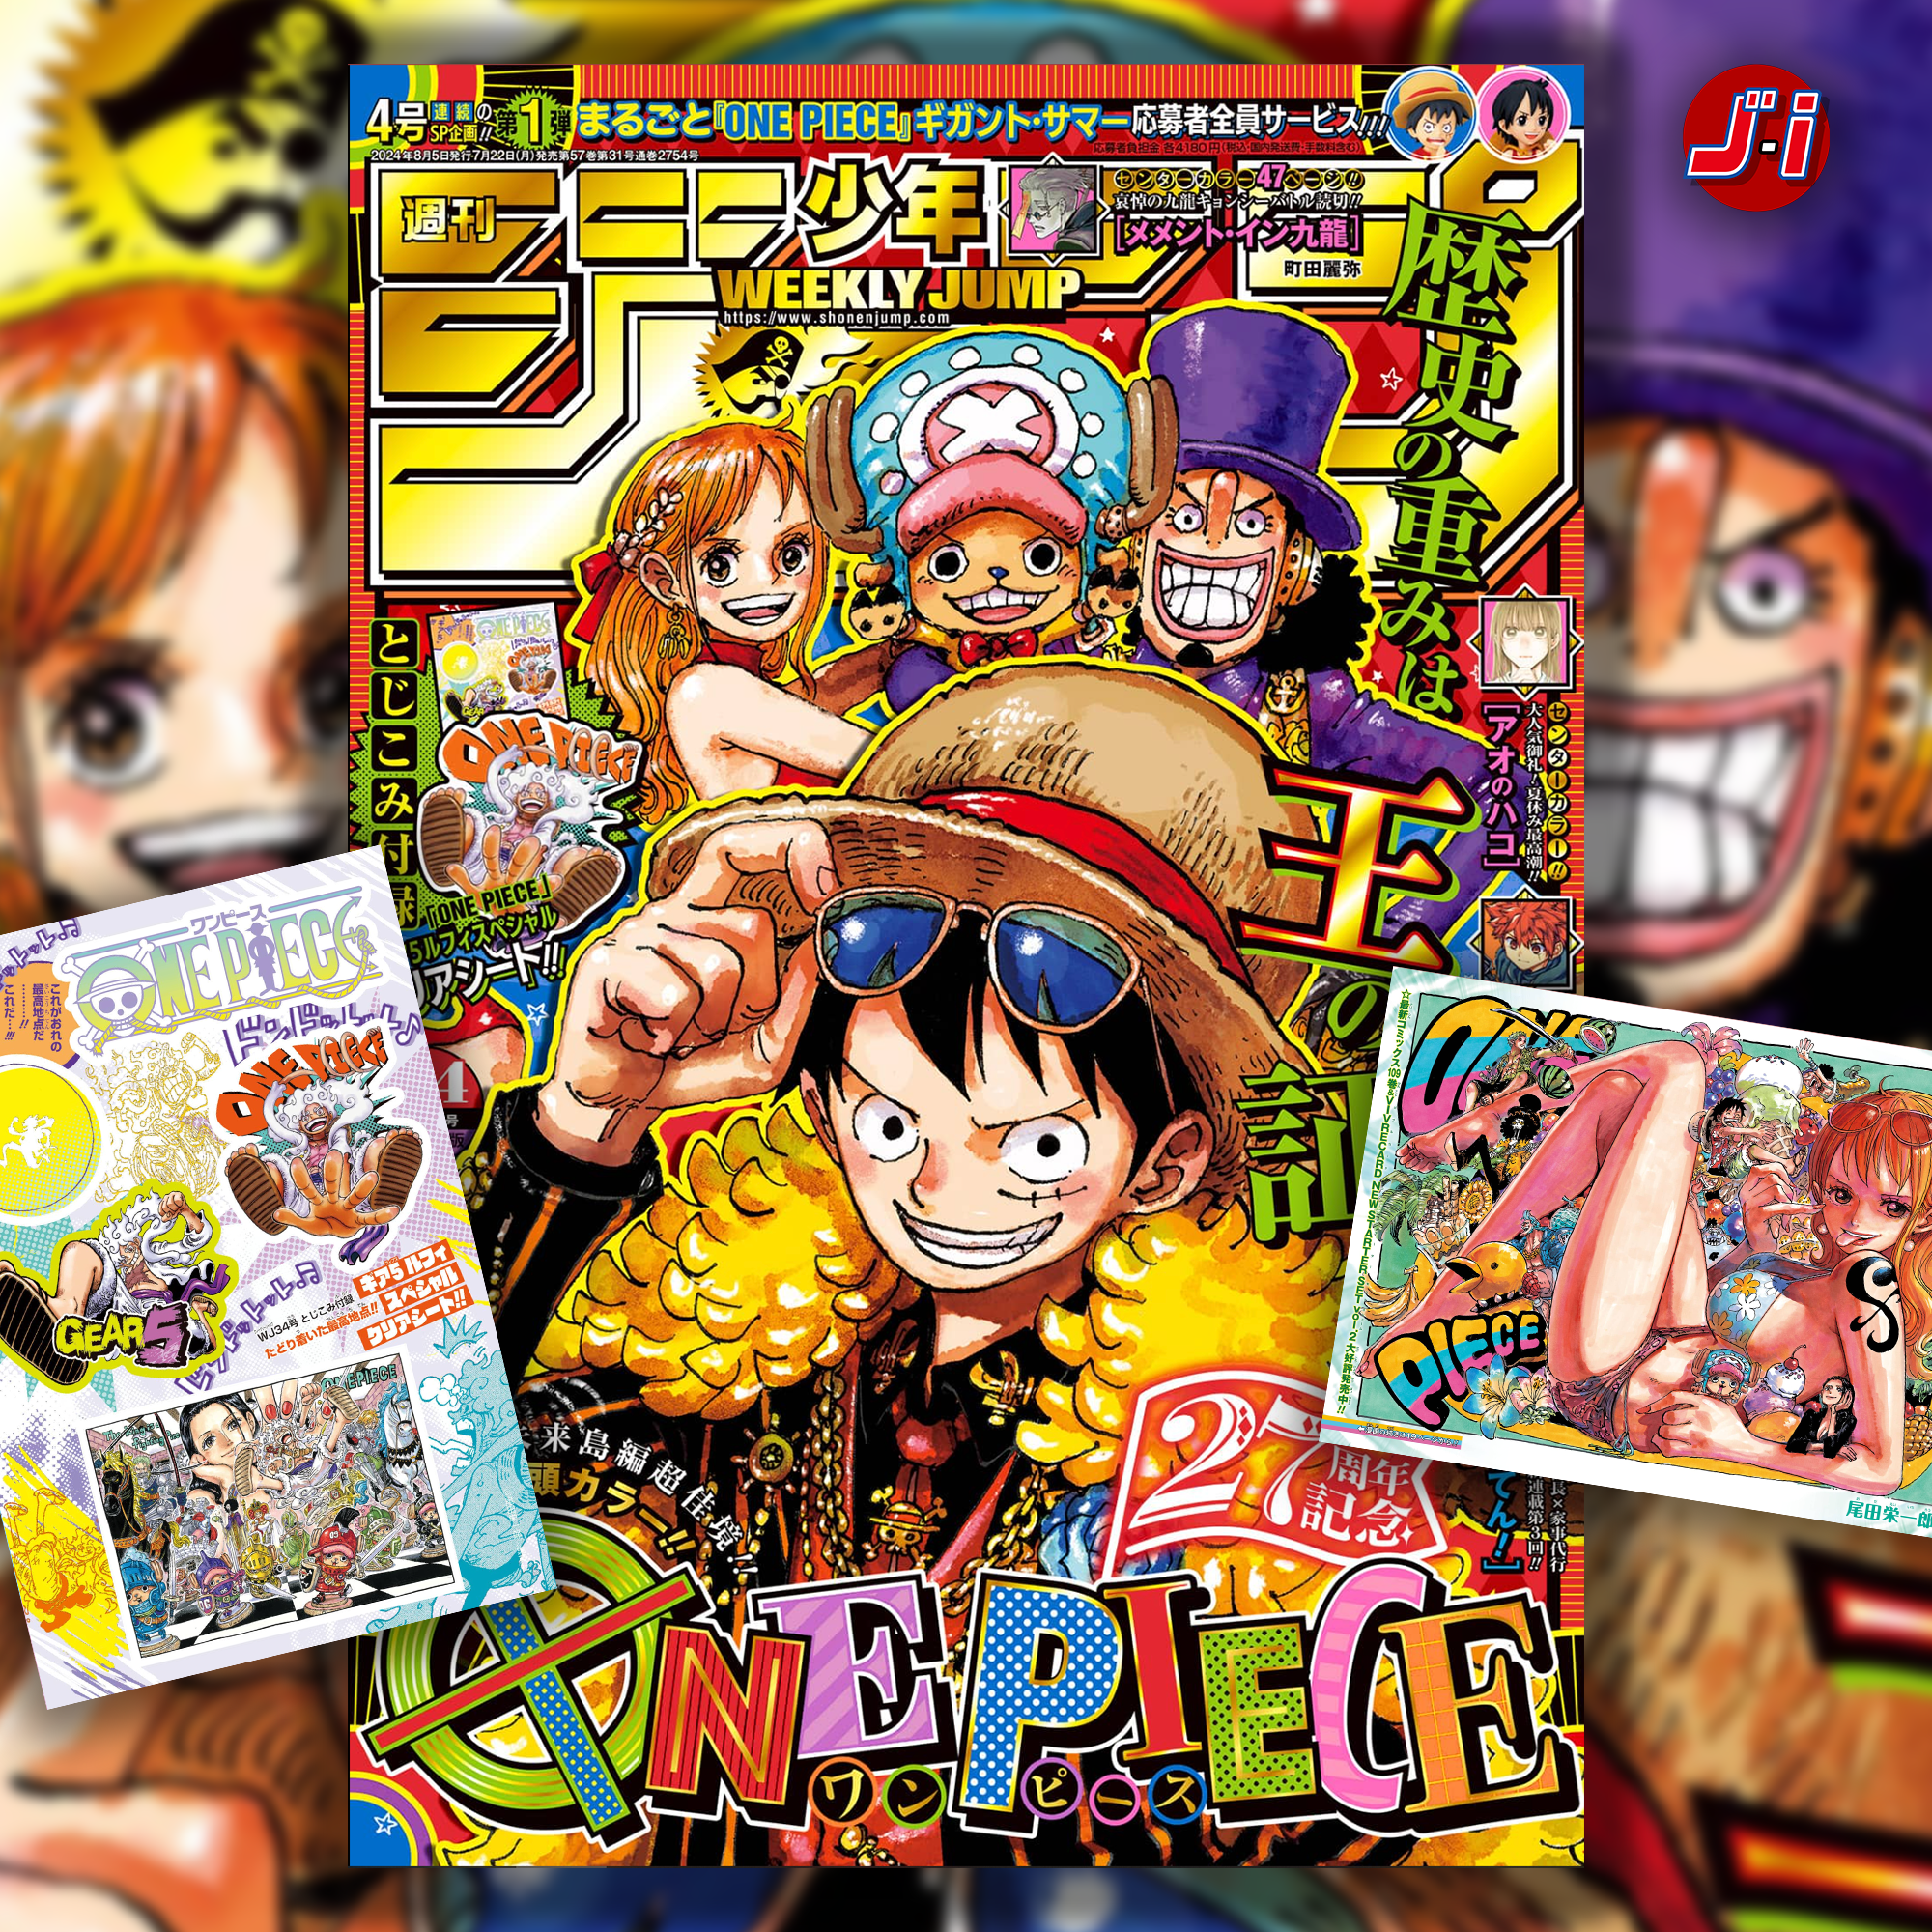 WEEKLY SHONEN JUMP 34-2024 ONE PIECE 27th ANNIVERSARY + GEAR 5 CLEAR SHEET + NAMI COLORSPREAD